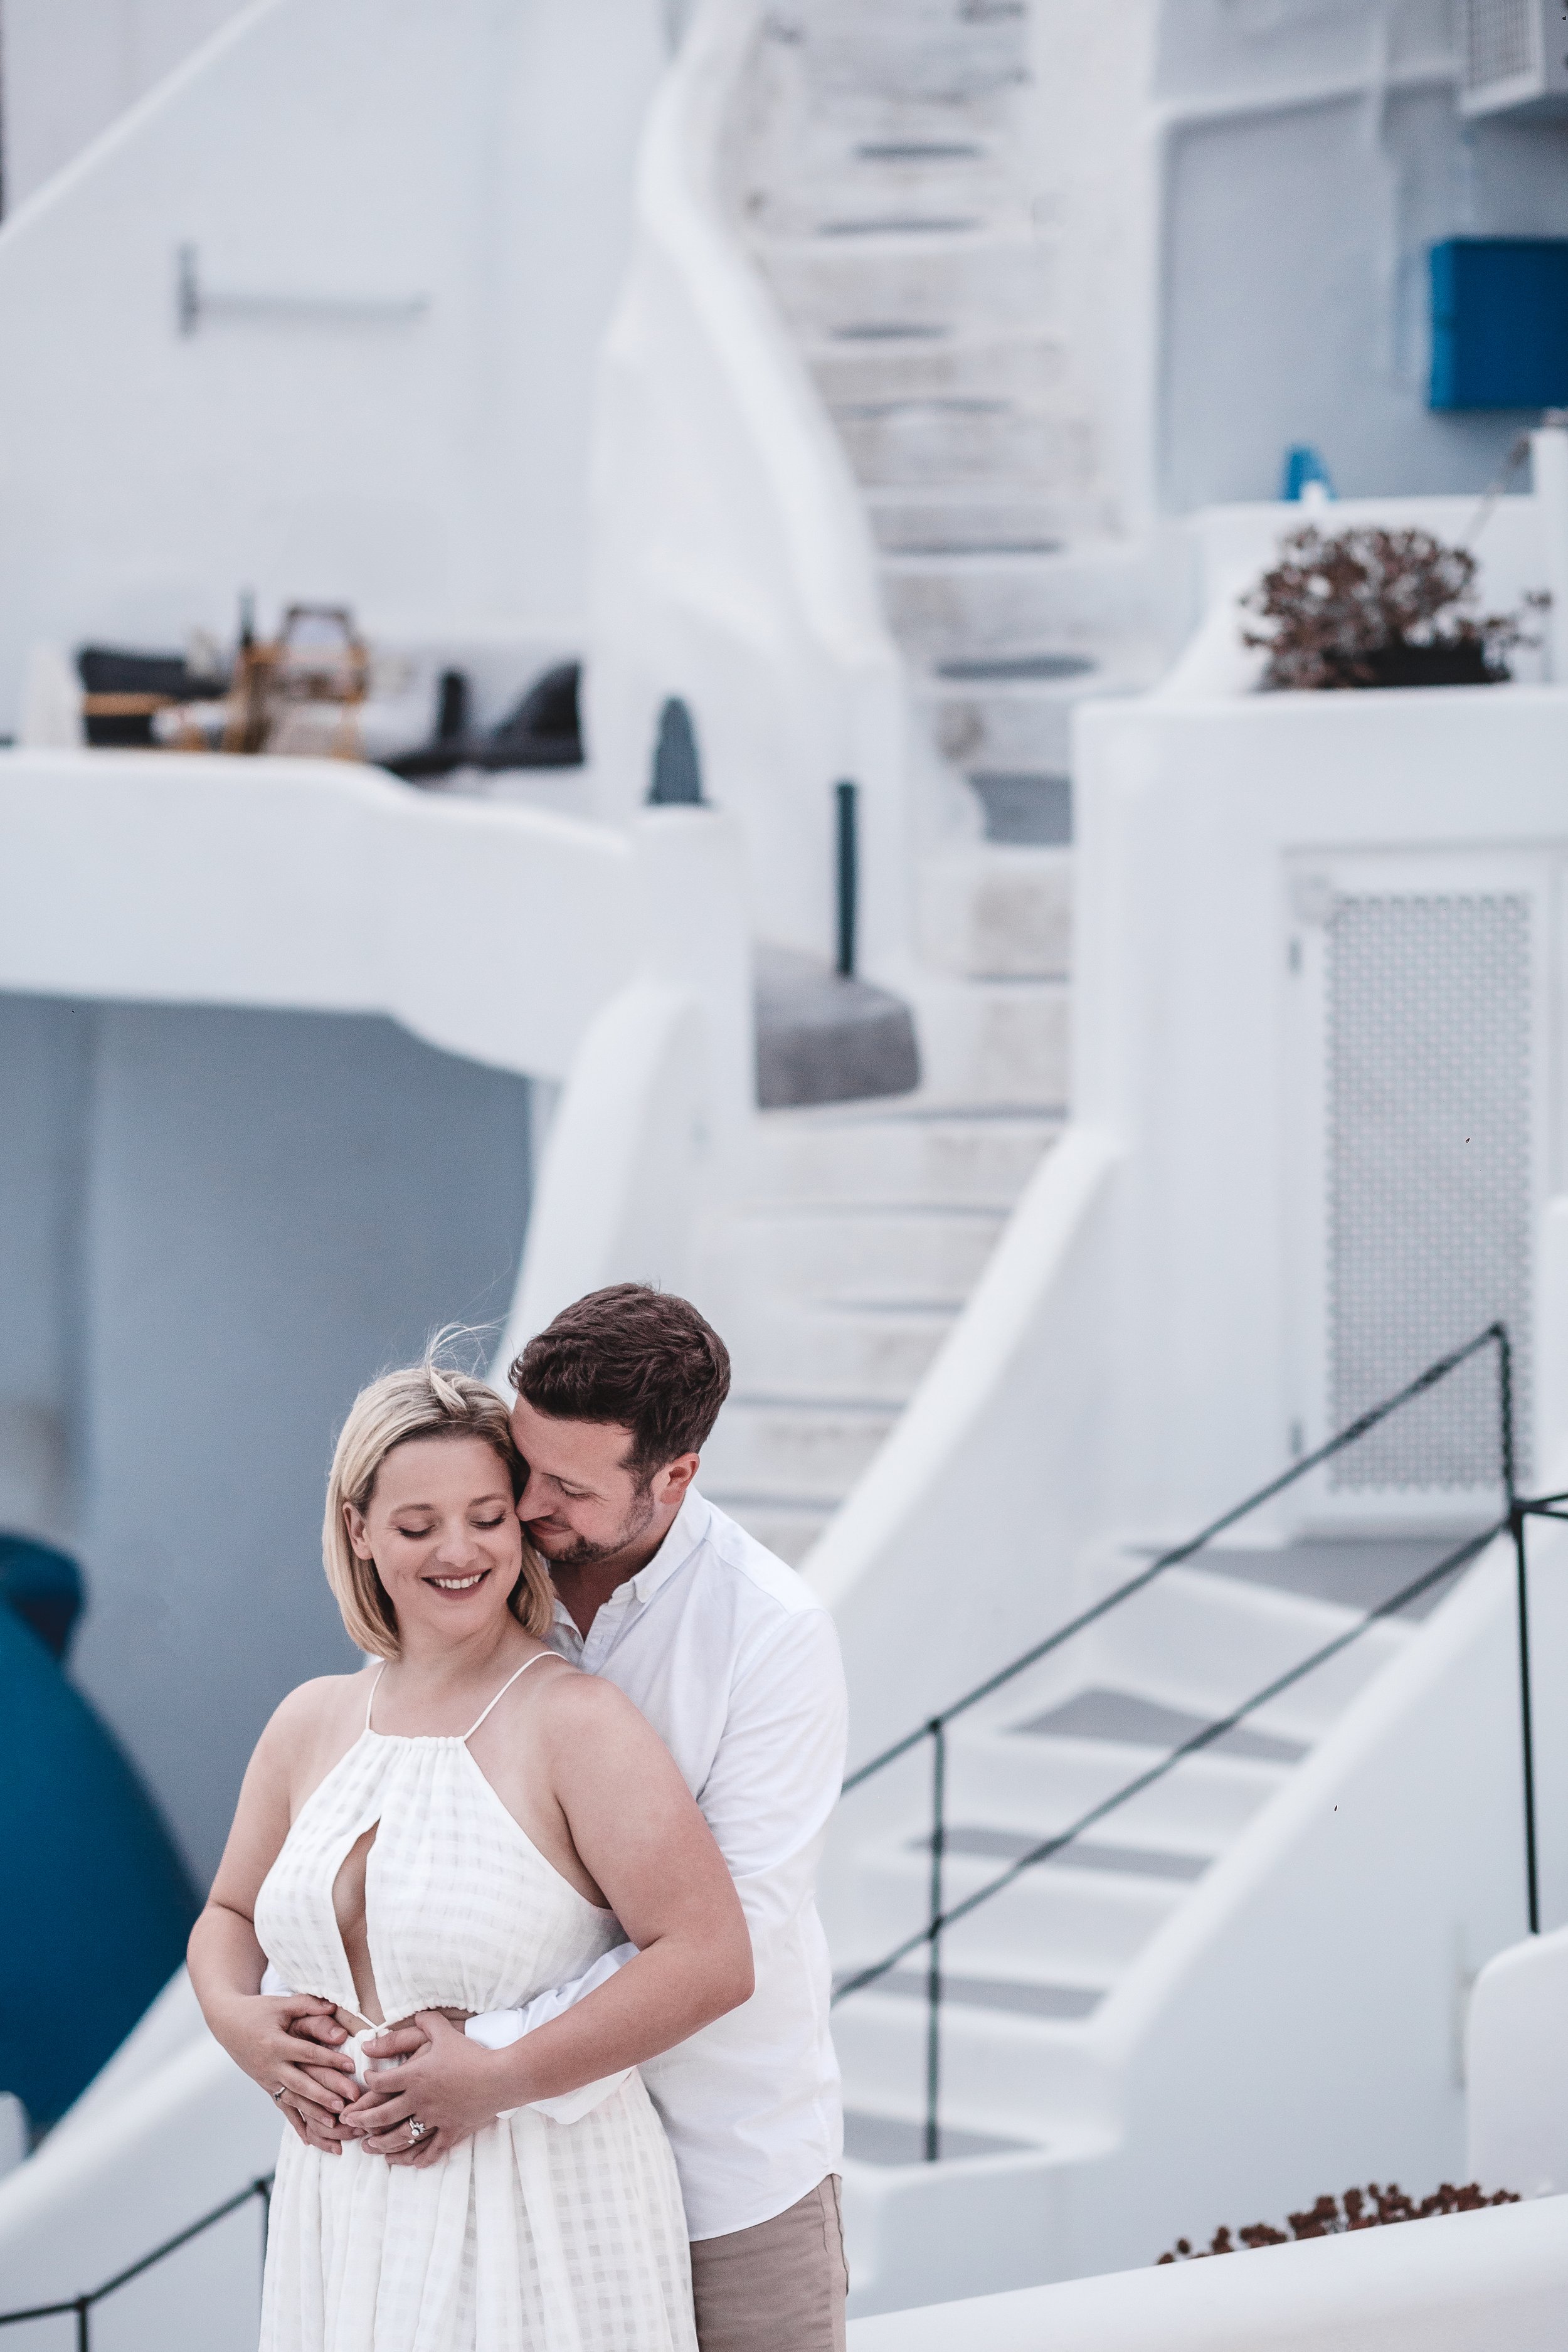 Wedding couple elopement by the blue dome churches of Santorini island, Greece